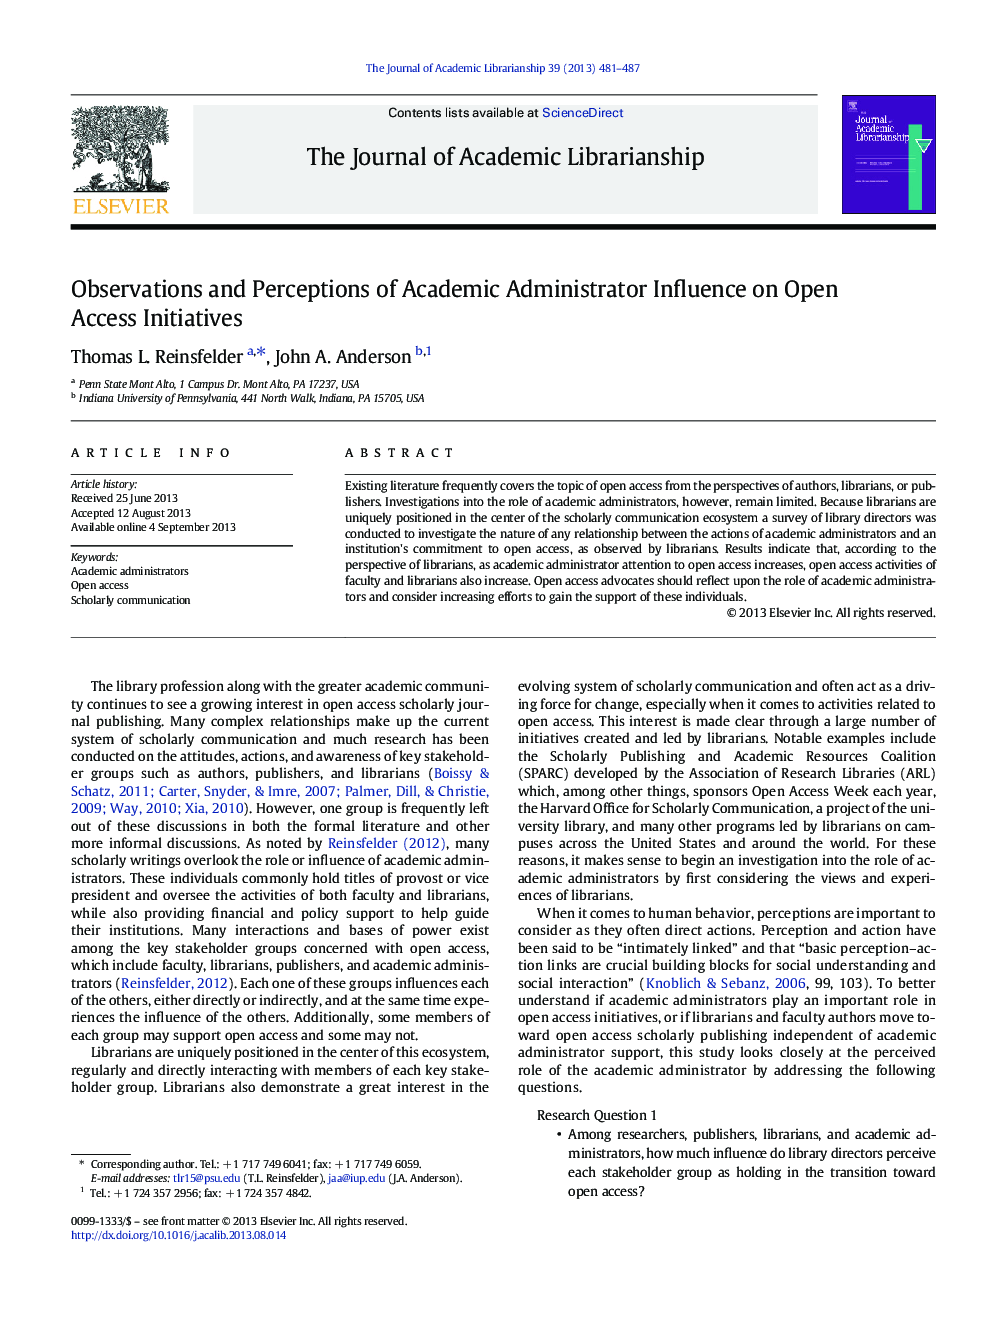 Observations and Perceptions of Academic Administrator Influence on Open Access Initiatives